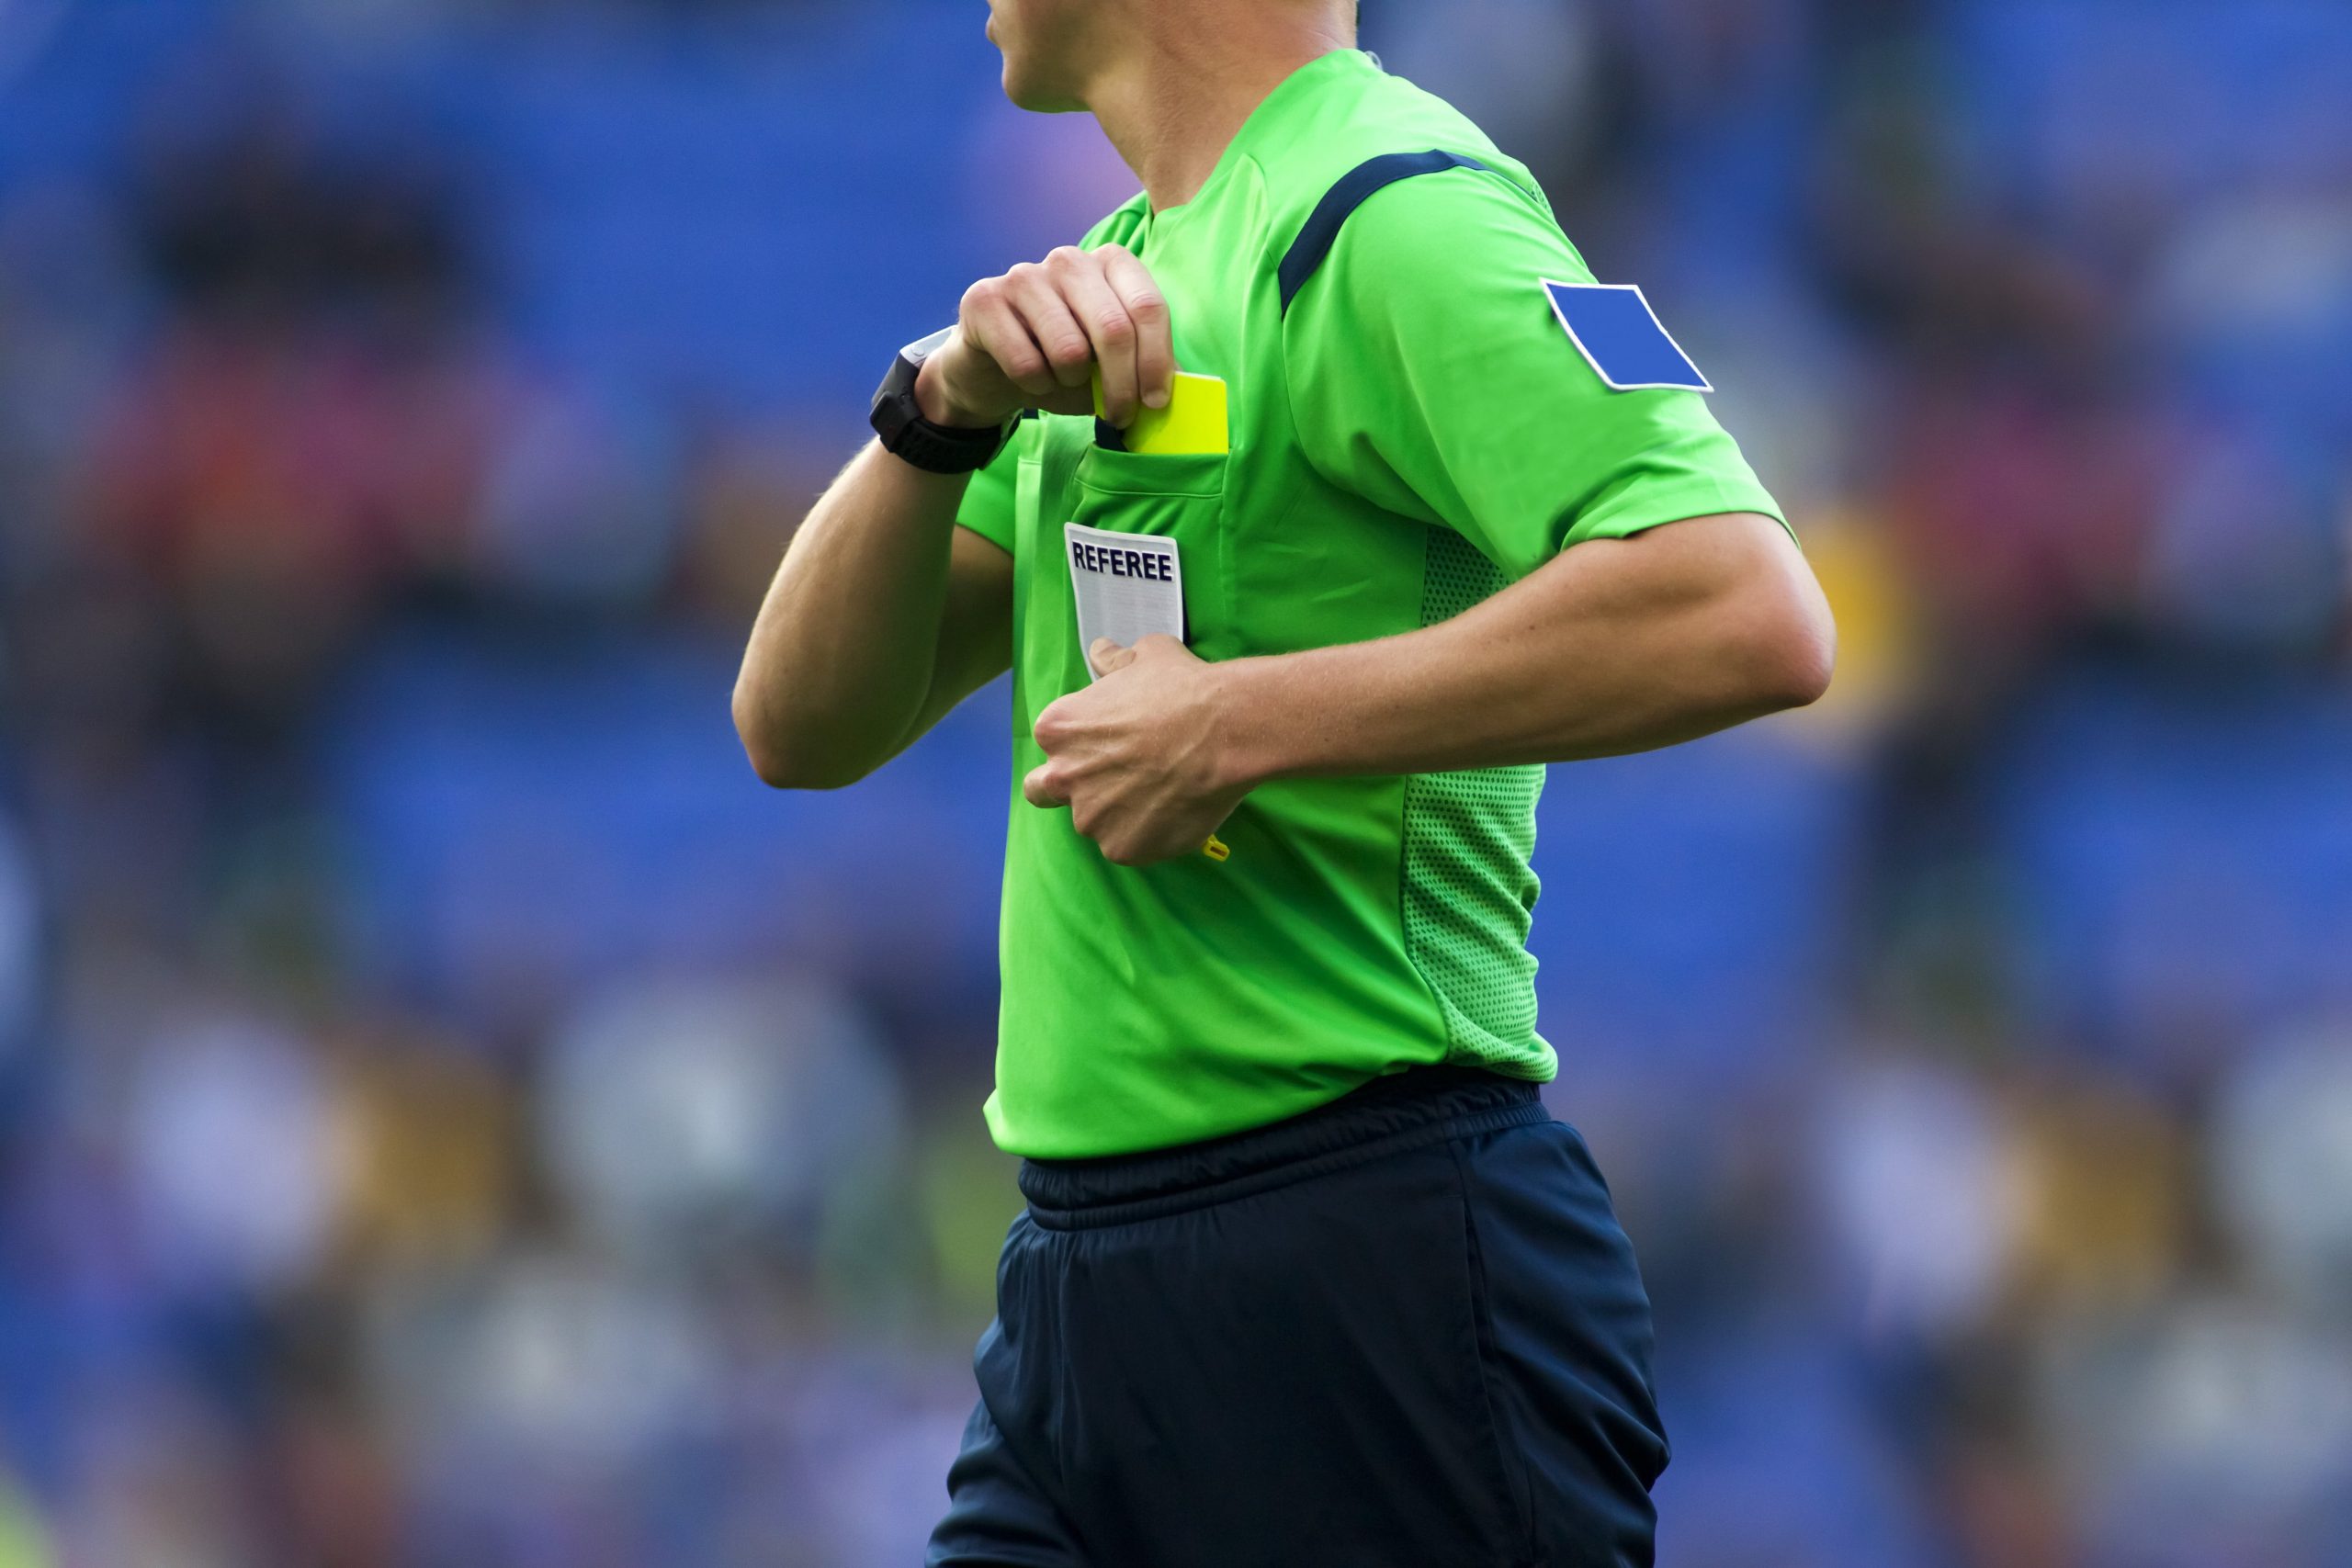 Soccer referee taking yellow card out of pocket.